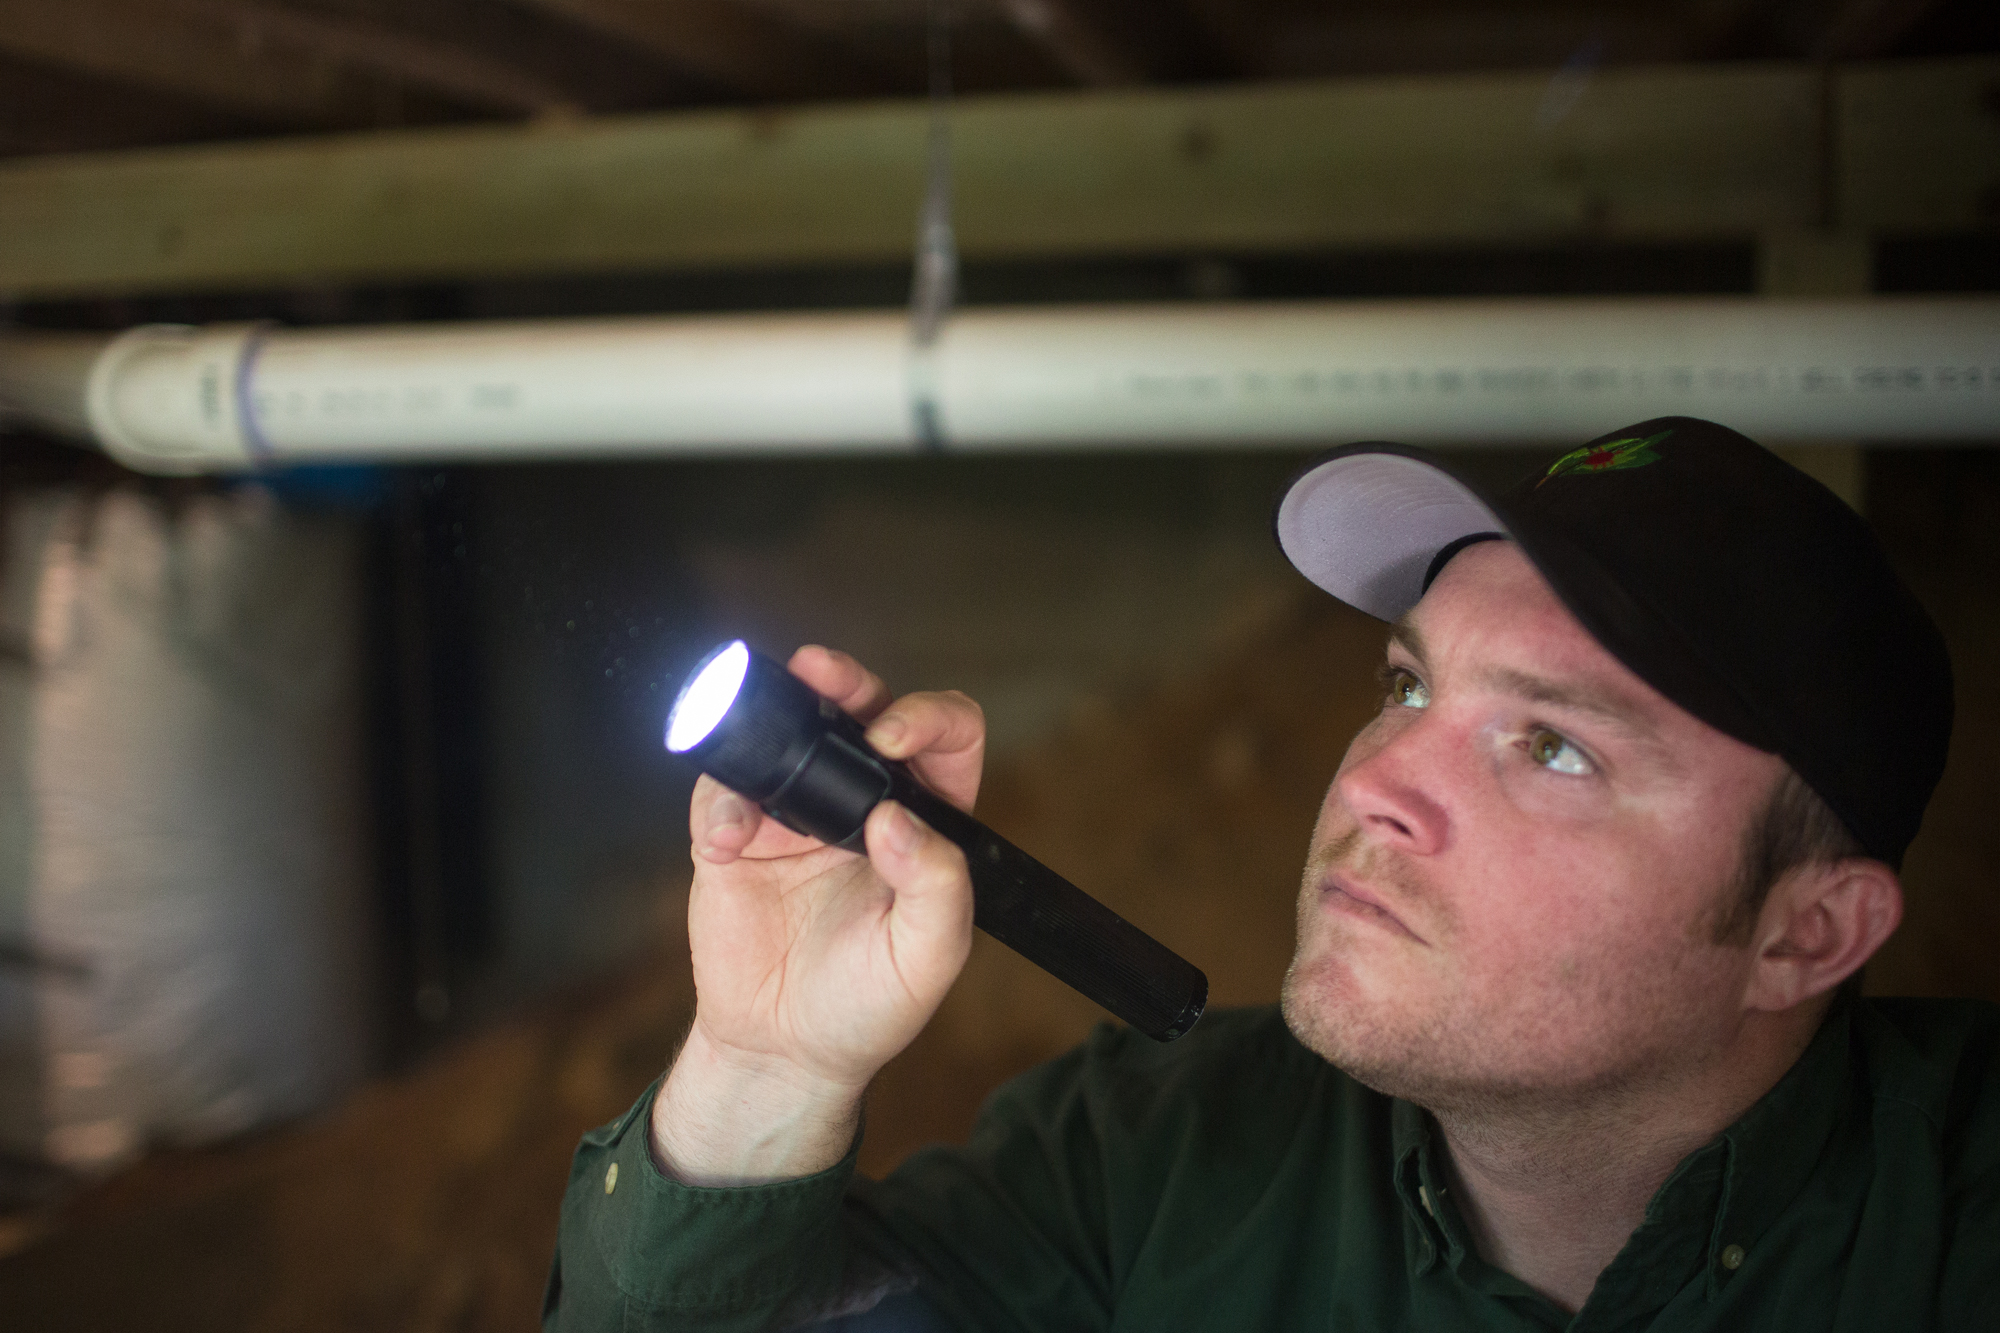 pest control technician inspection for termites in a crawl space